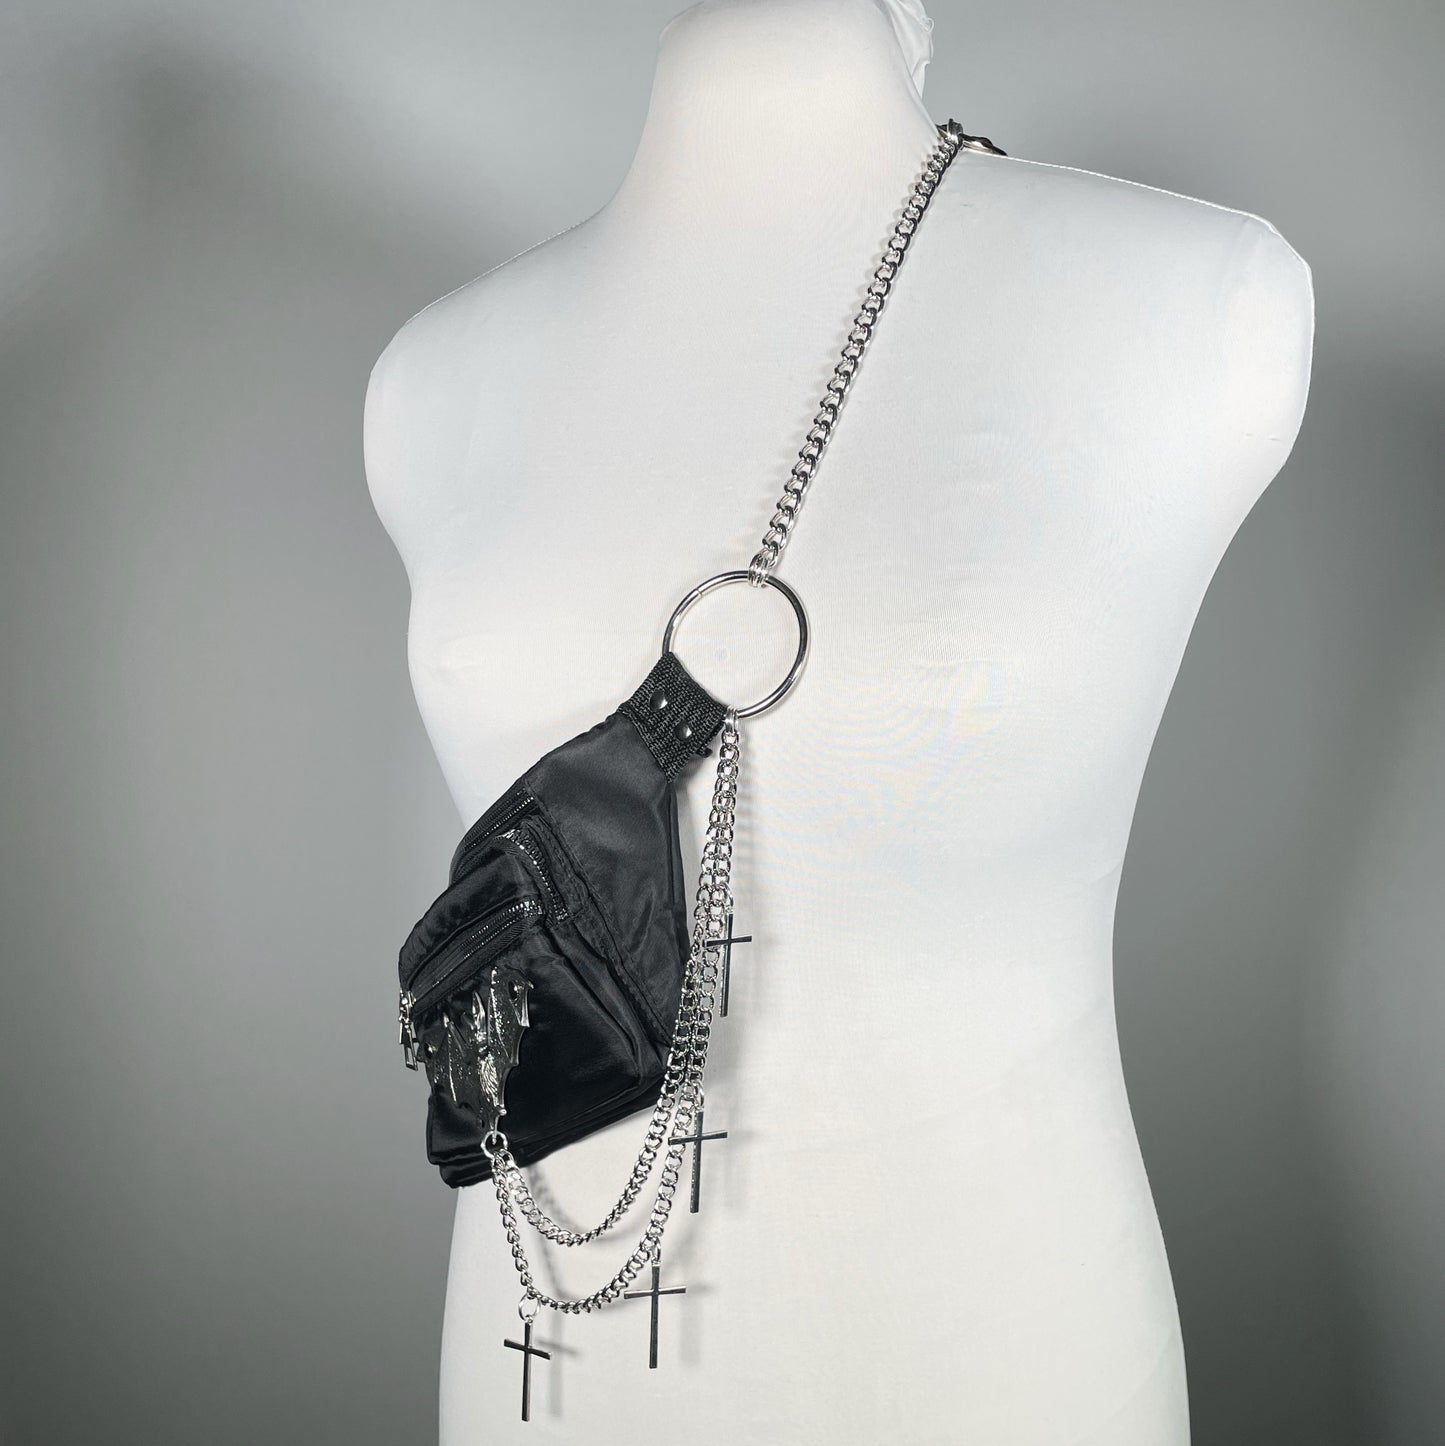 Fanny Pack/Crossbody Bag with Bat, Chains and Crosses